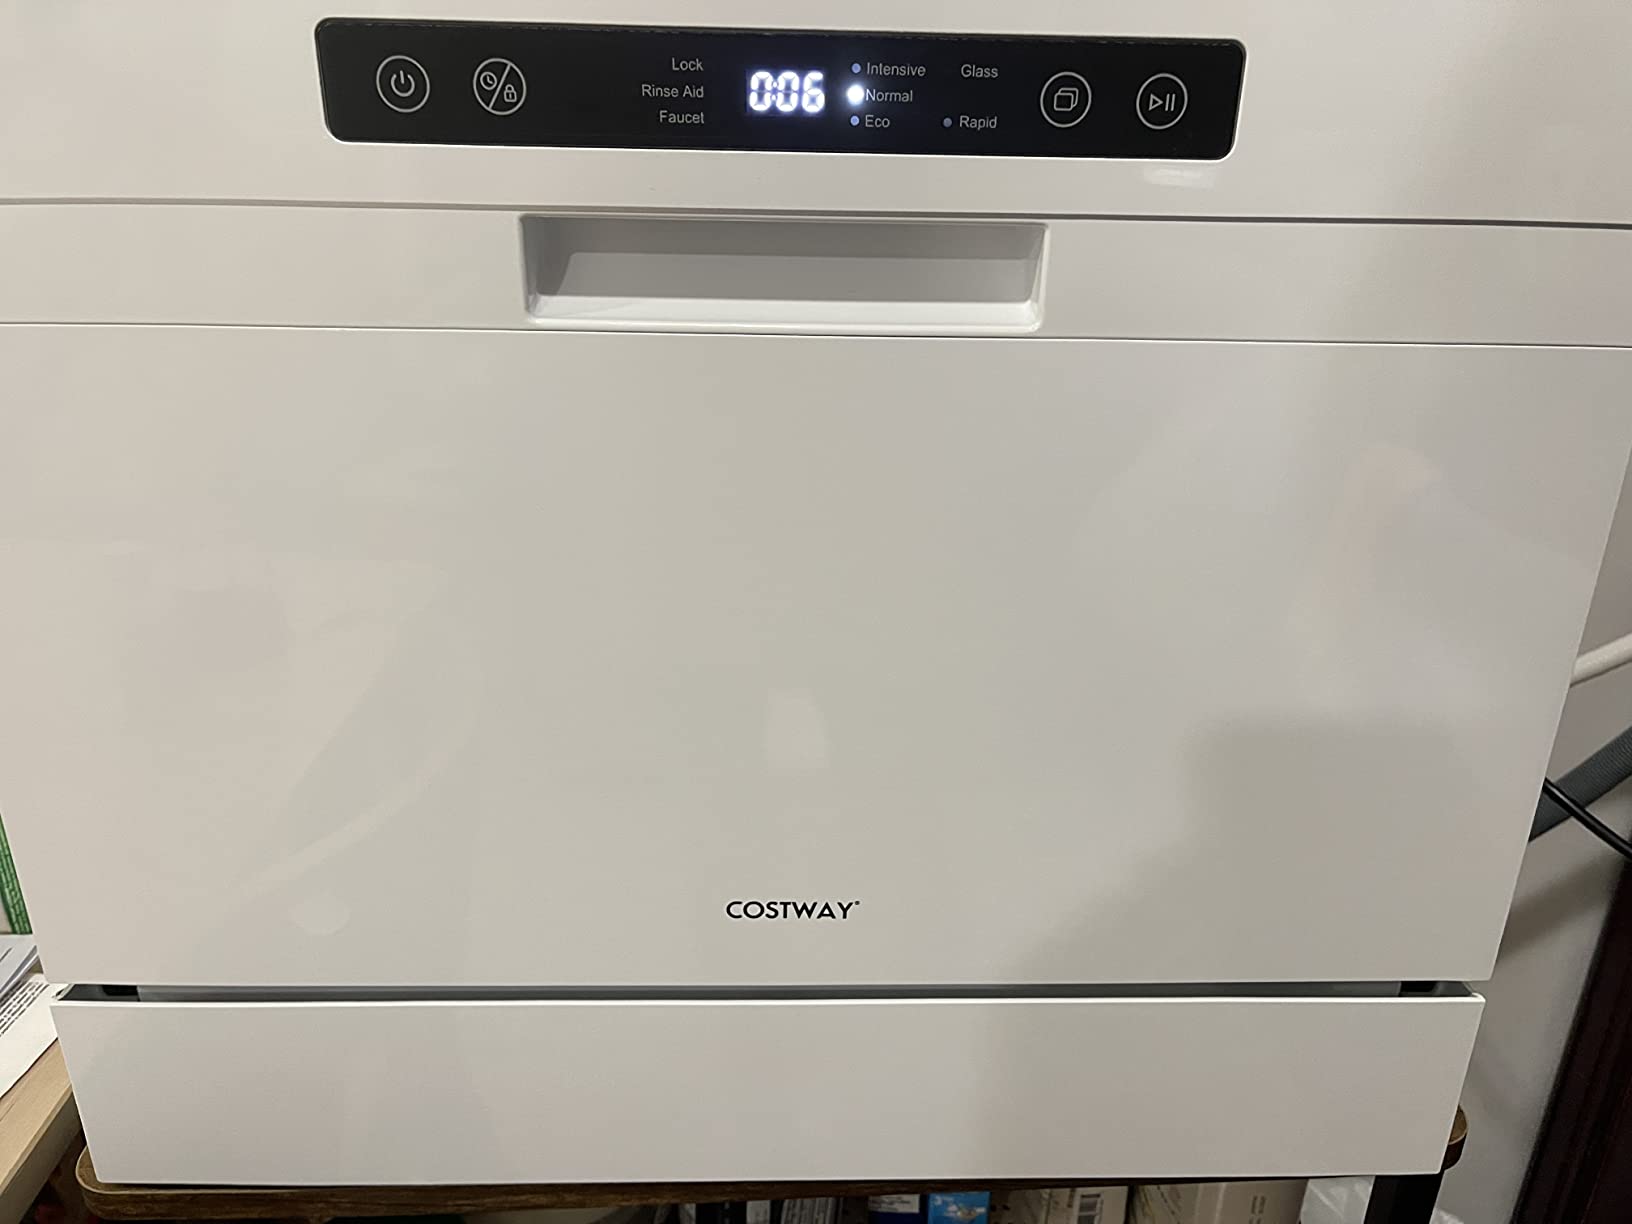  COSTWAY Portable Countertop Dishwasher, Compact Dishwasher with  7.5 L Built-in Water Tank, 360° Dual Spray Arms, 5 Washing Programs,  Air-Dry Function, Child Lock, Mini Dishwasher for Apartment, RV : Appliances